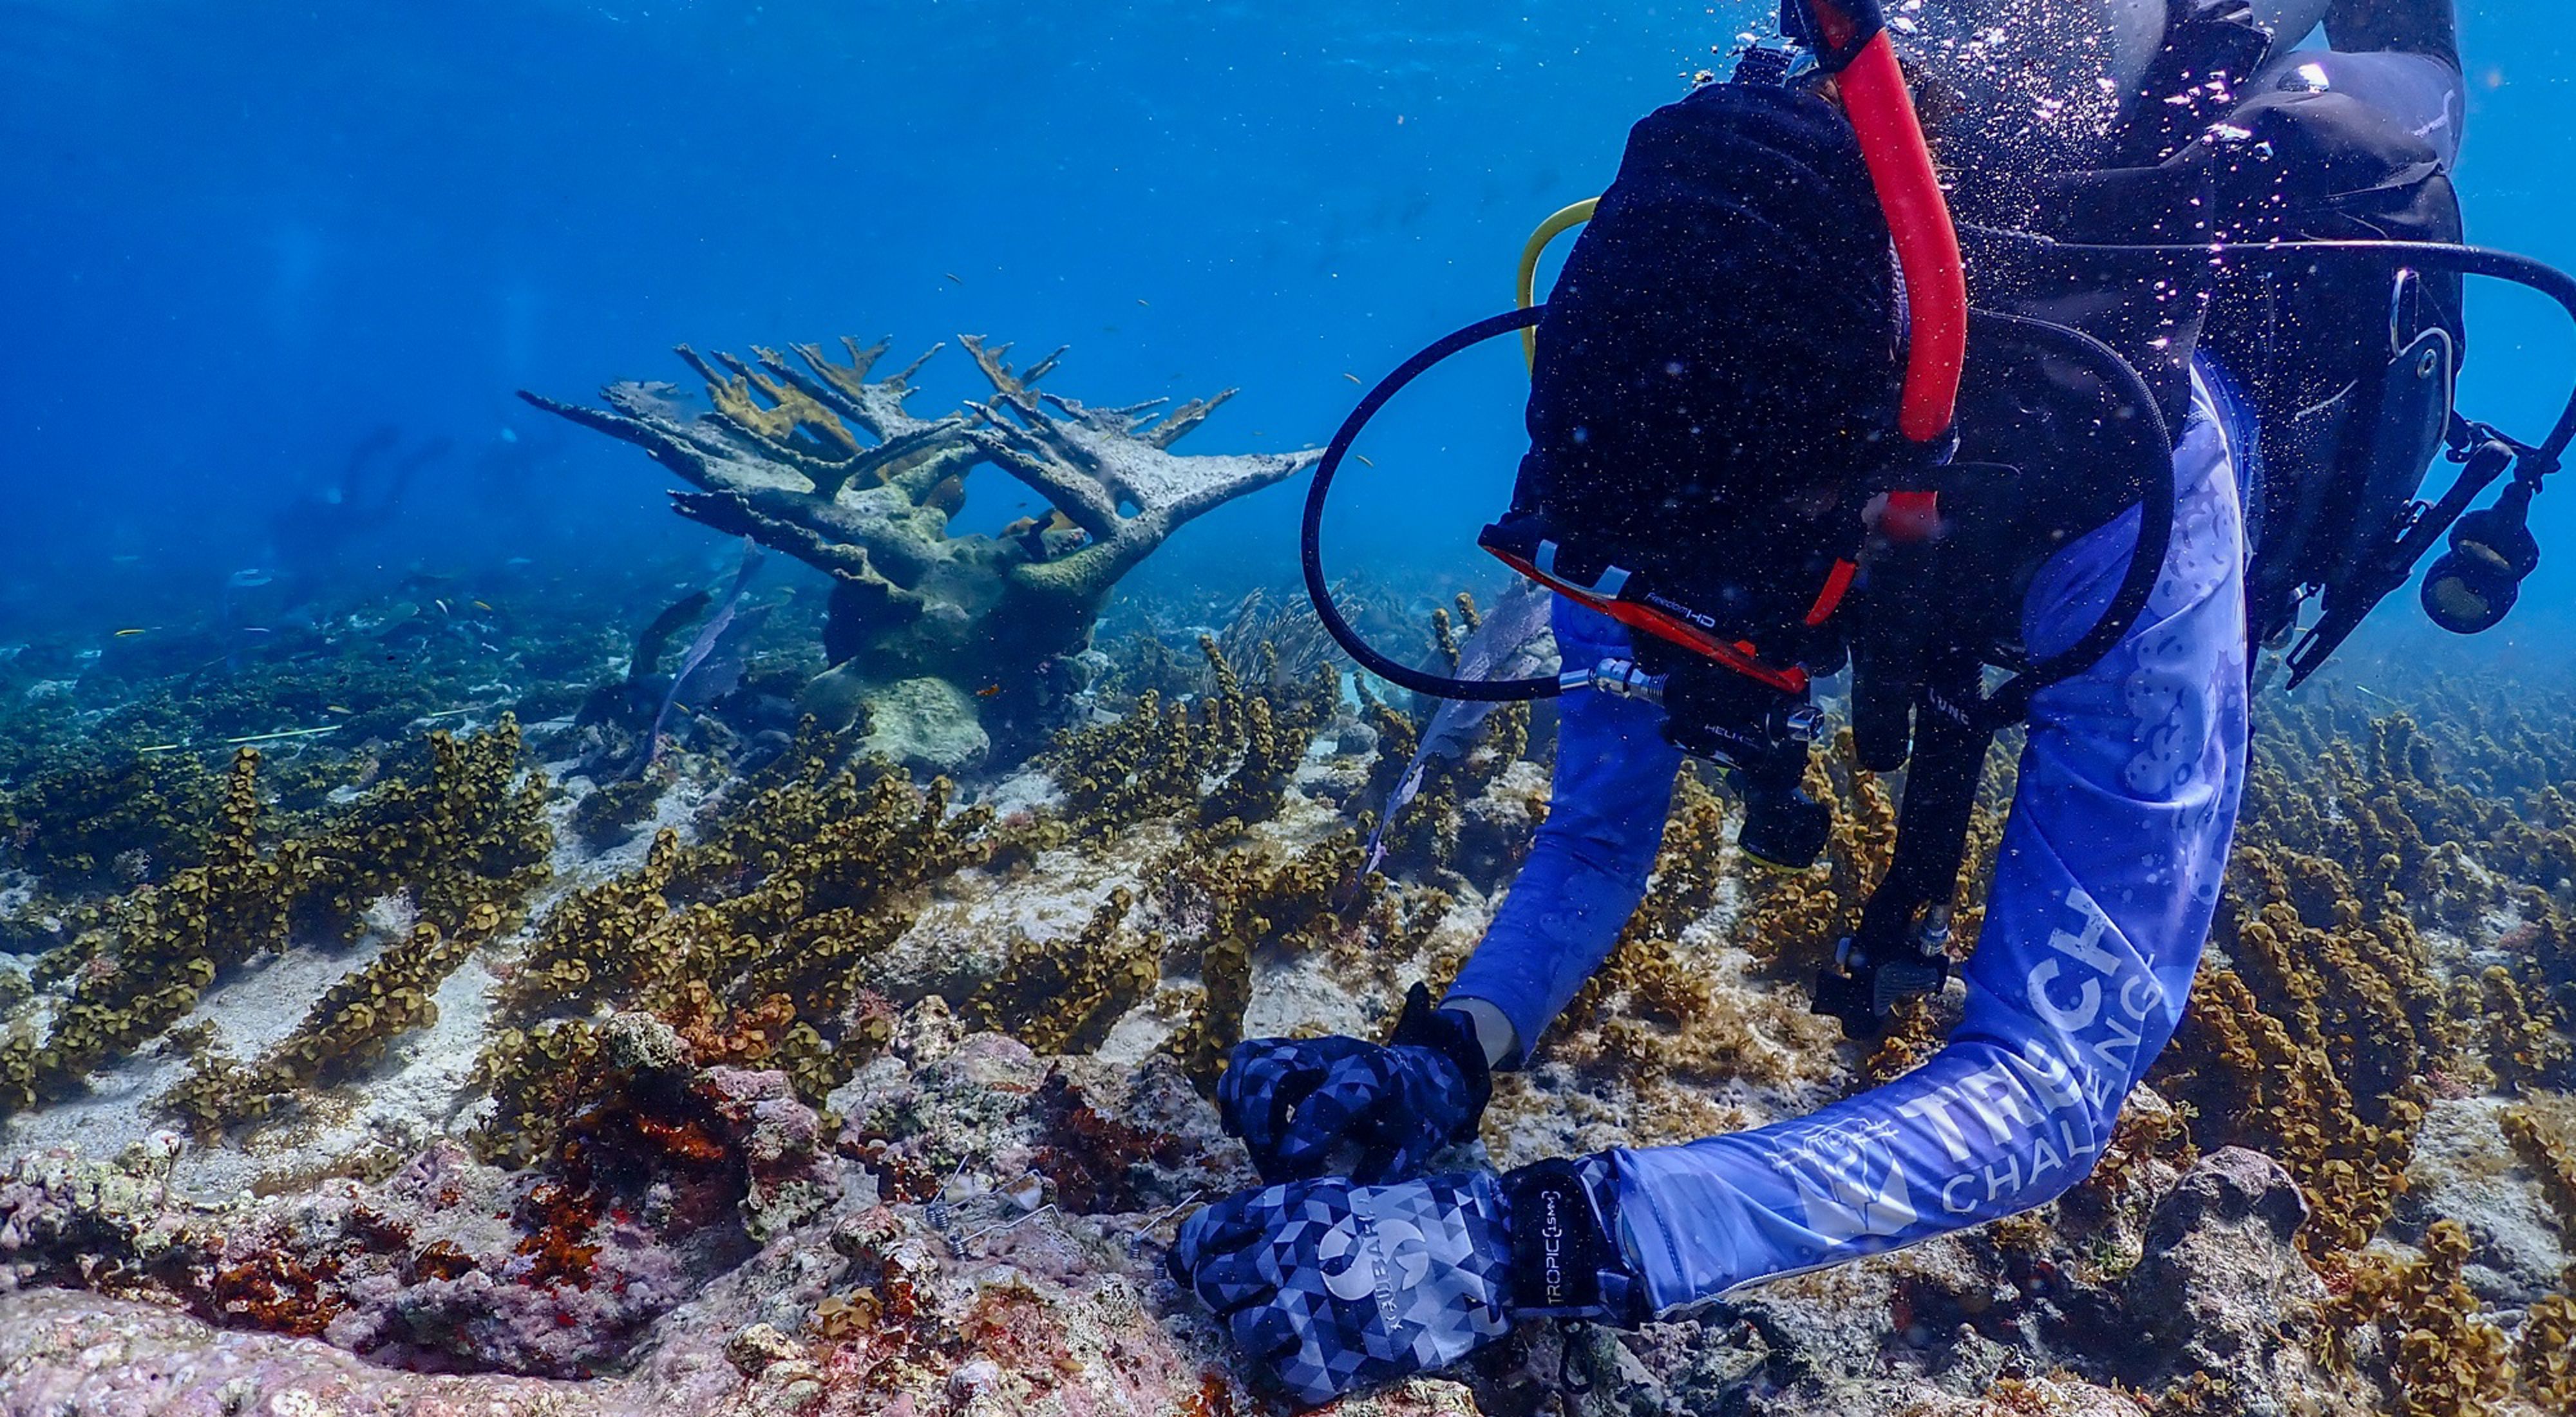 A snorkeler dives to plant a coral fragment with elkhorn coral in the background.